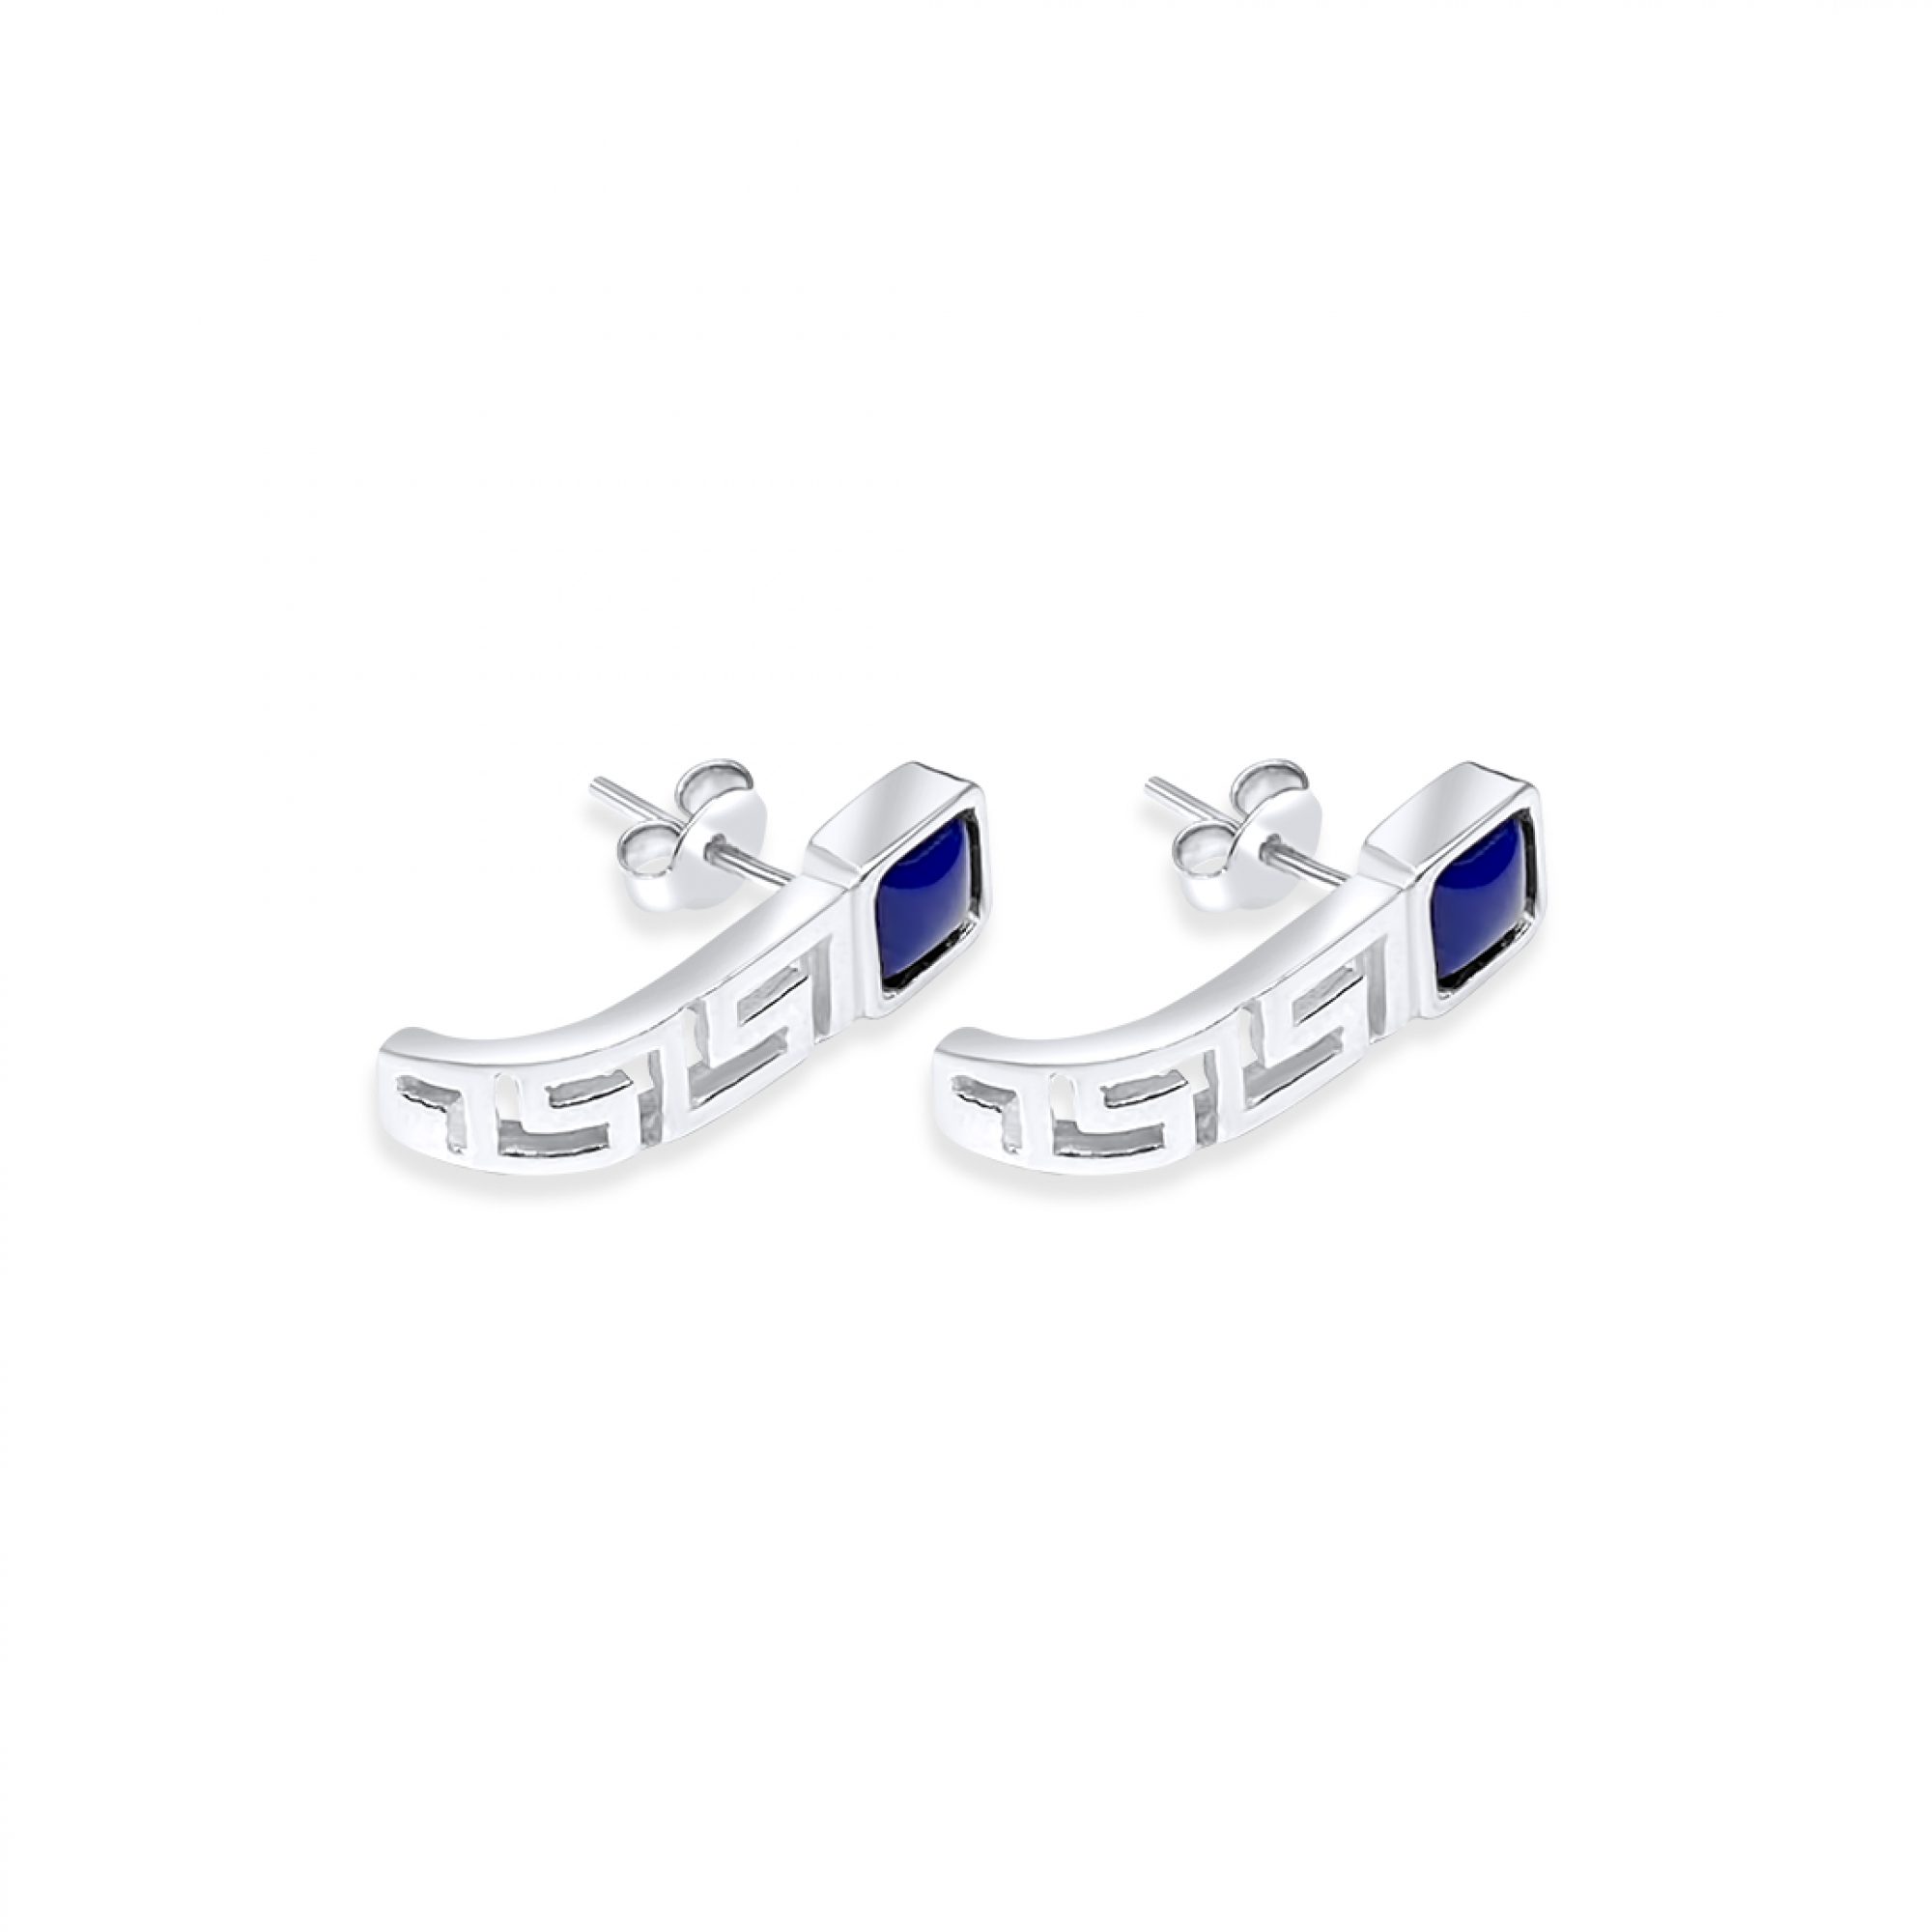 Meander earrings with lapis lazuli stones